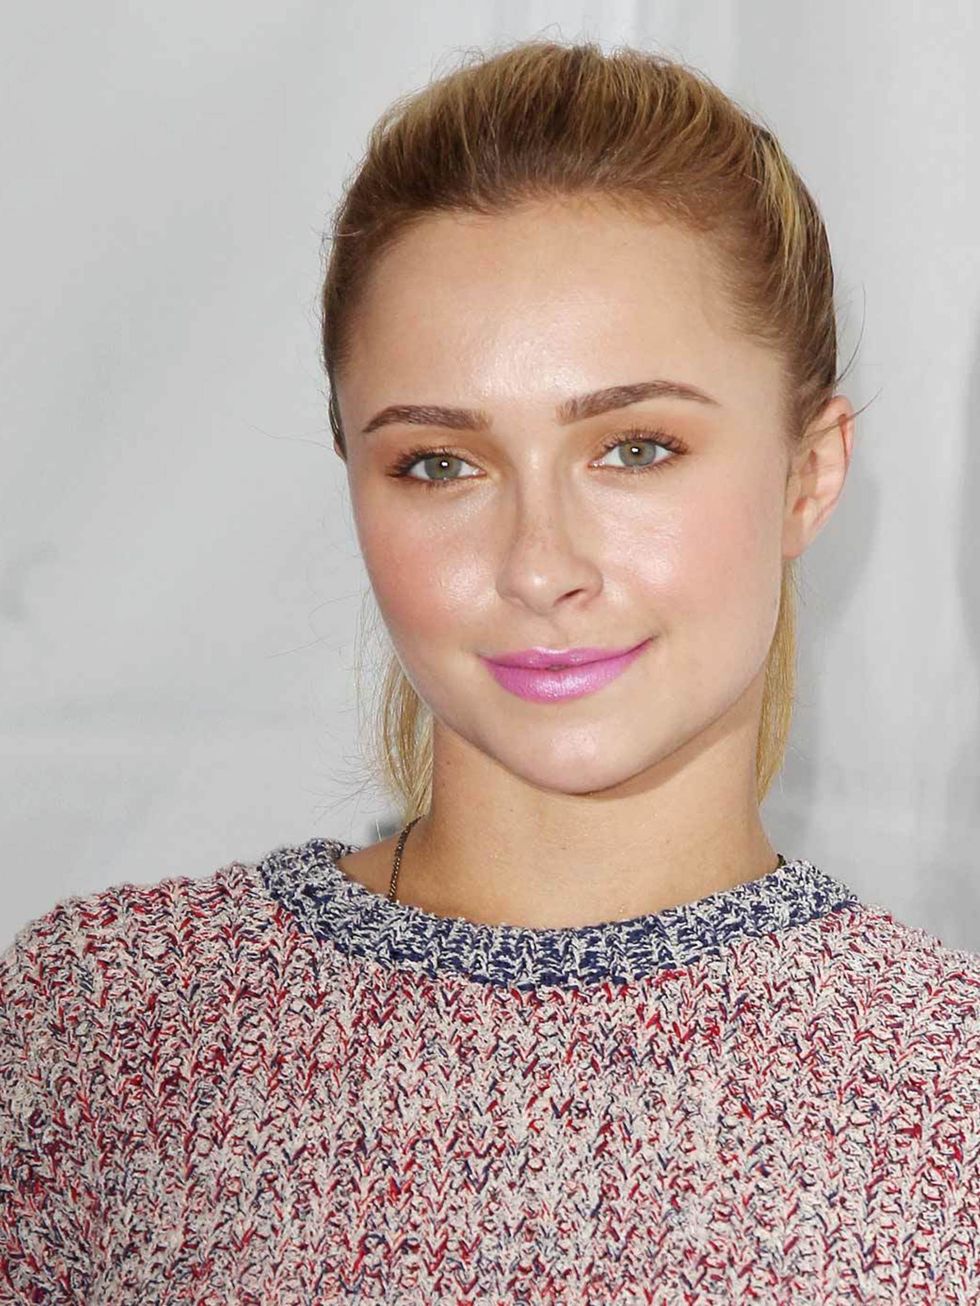 <p><strong><a href="http://www.elleuk.com/star-style/celebrity-style-files/hayden-panettiere">Hayden Panettiere</a></strong></p><p>A dusting of peachy eye shadow, a few slicks of mascara and a cerise glossy lip make for a great holiday day-look. </p>